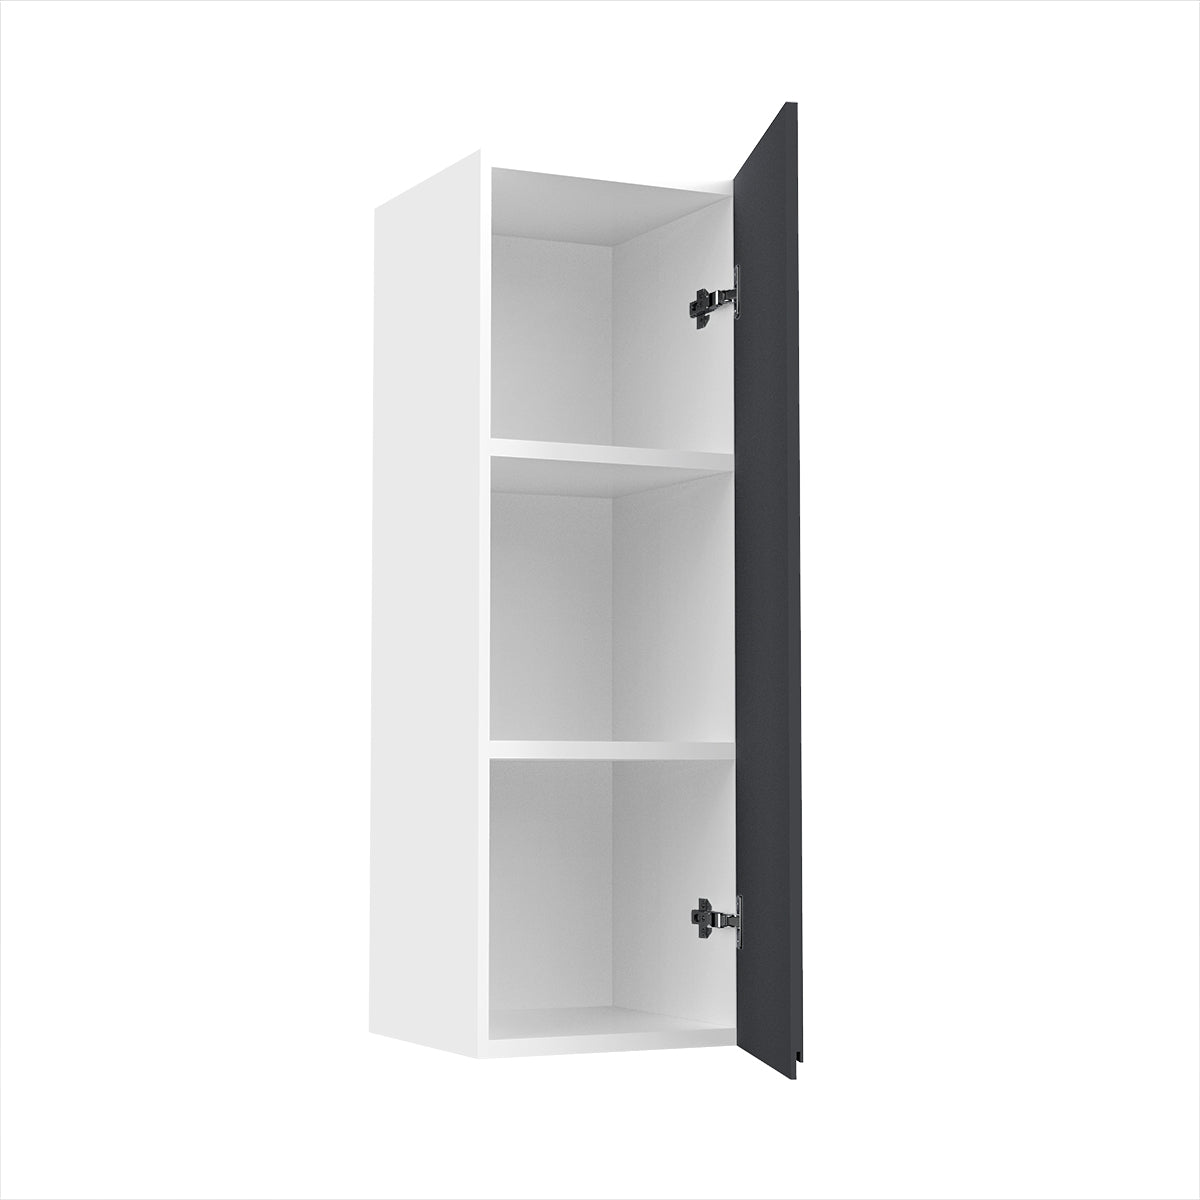 RTA - Lacquer Grey - Single Door Wall Cabinets | 12"W x 36"H x 12"D